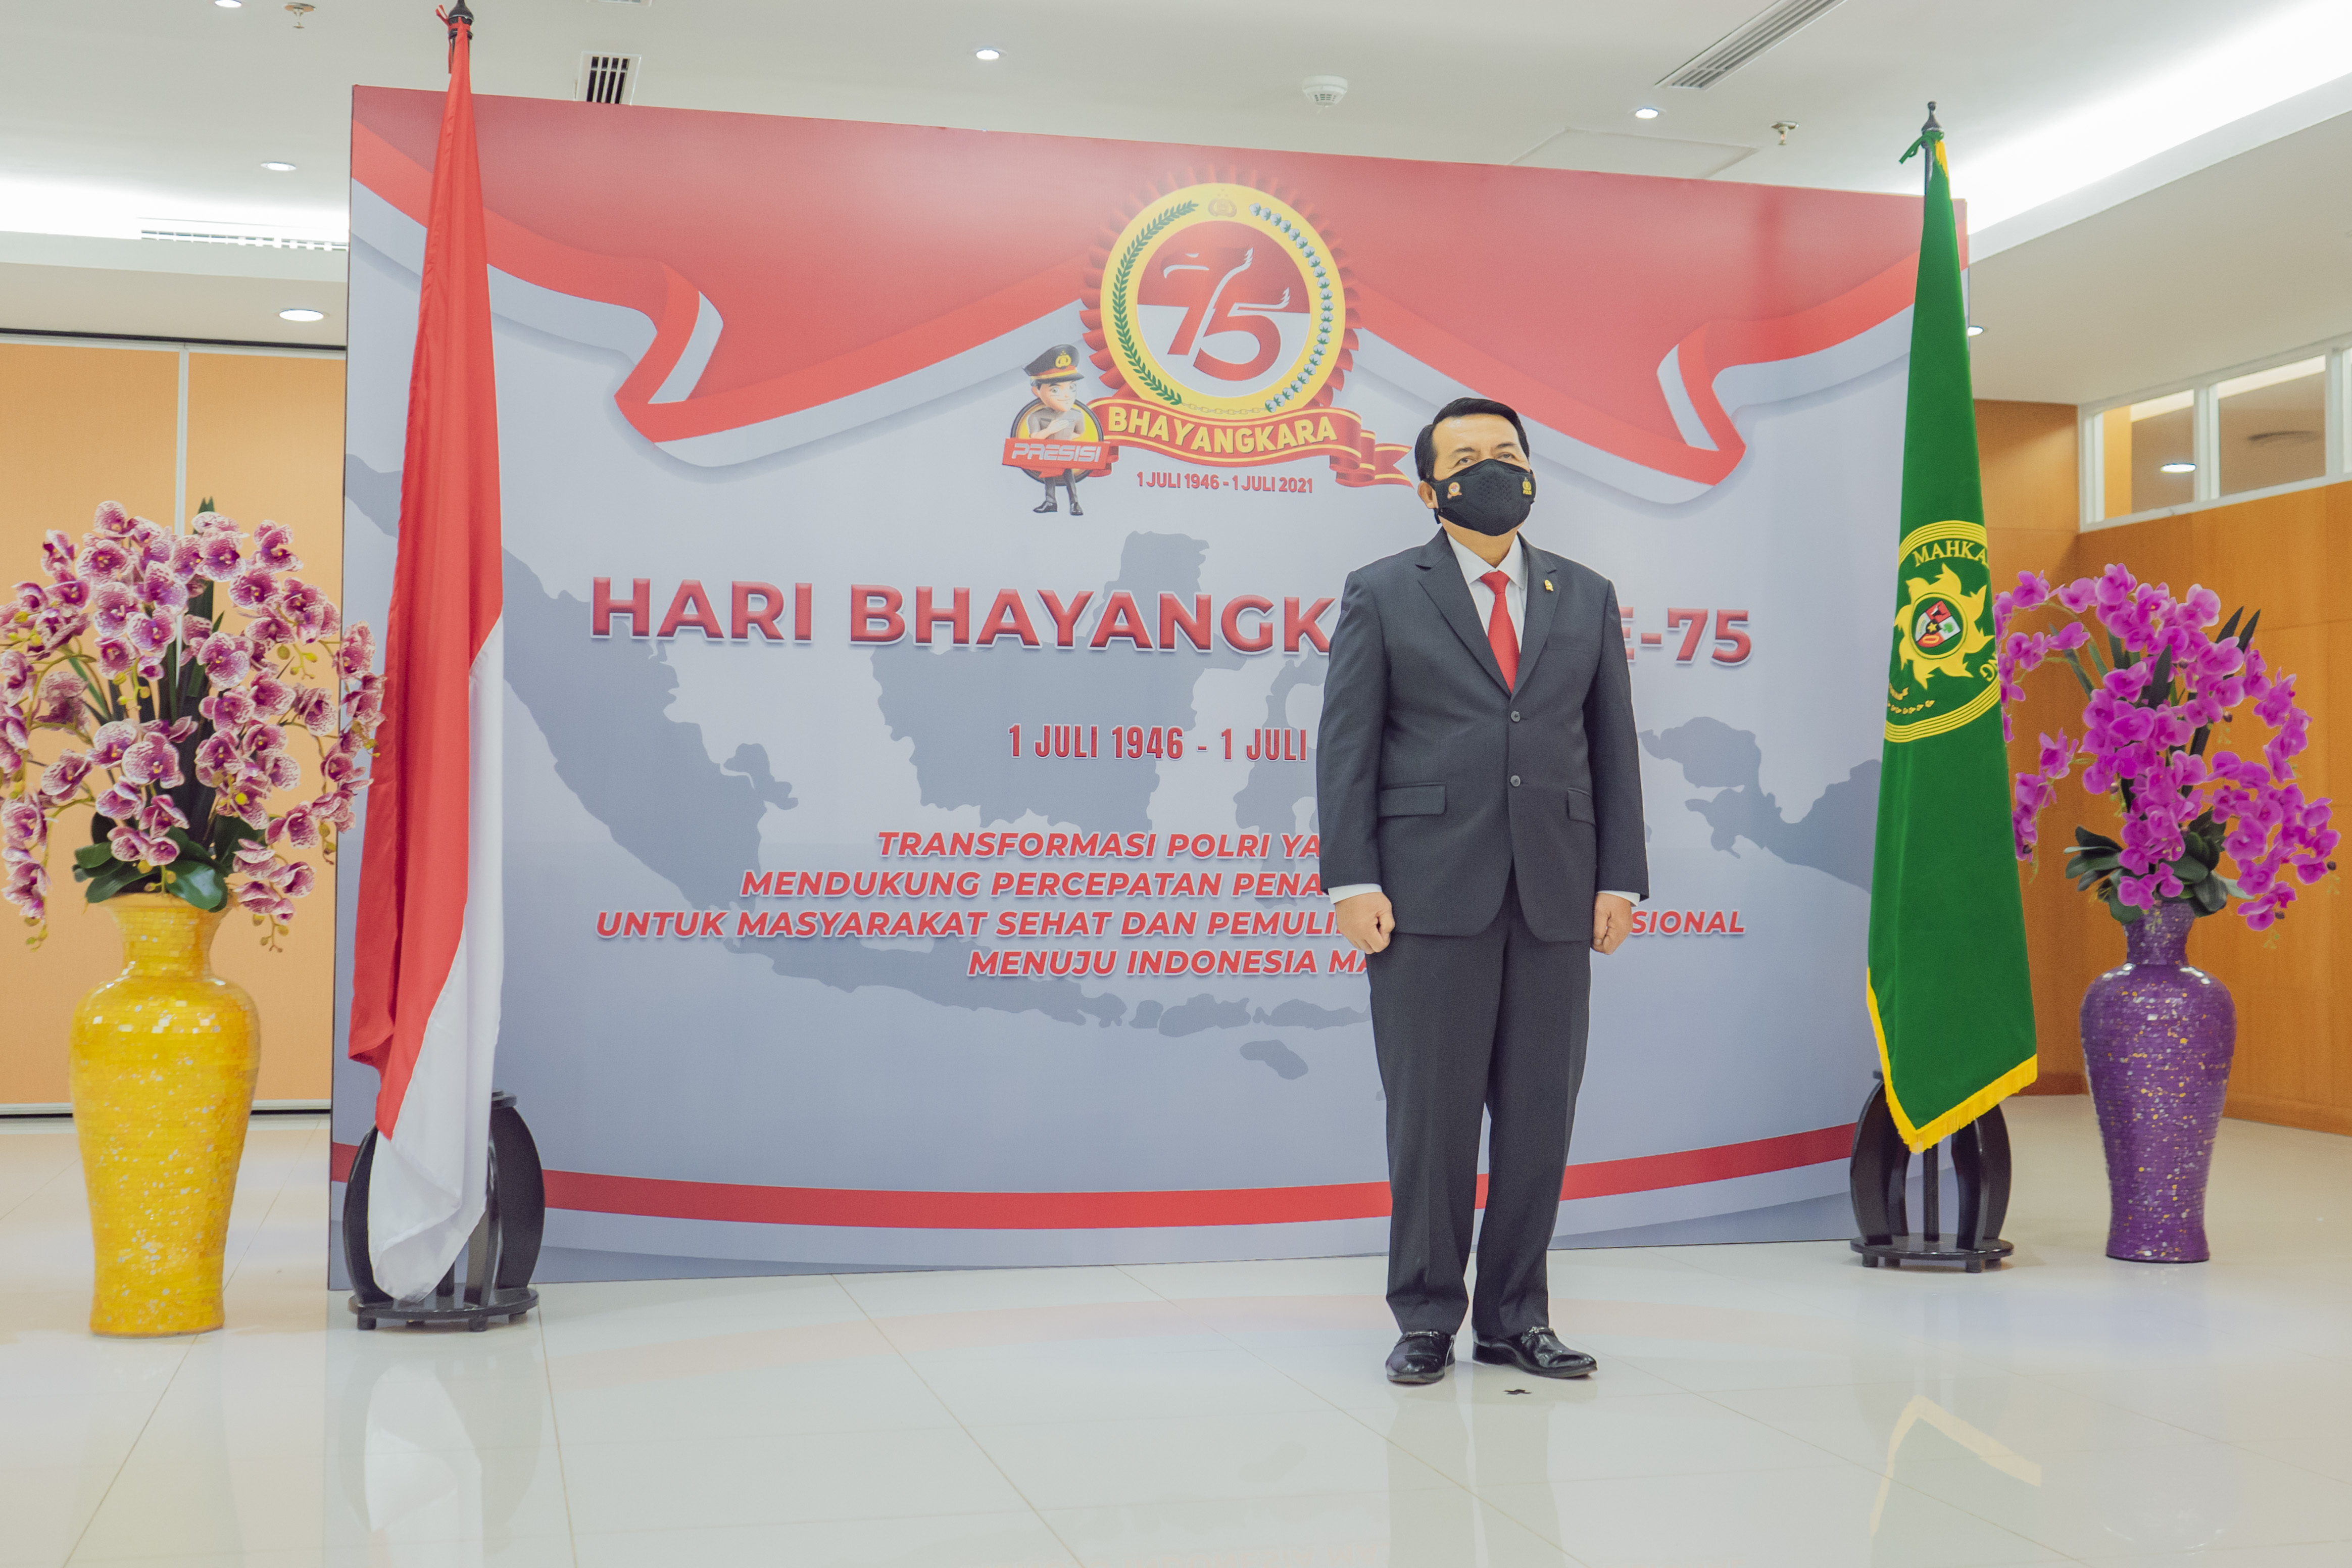 CHIEF JUSTICE SYARIFUDDIN ATTENDED THE VIRTUAL OCCASION OF COMMEMORATION OF THE 75TH ANNIVERSARY OF BHAYANGKARA DAY